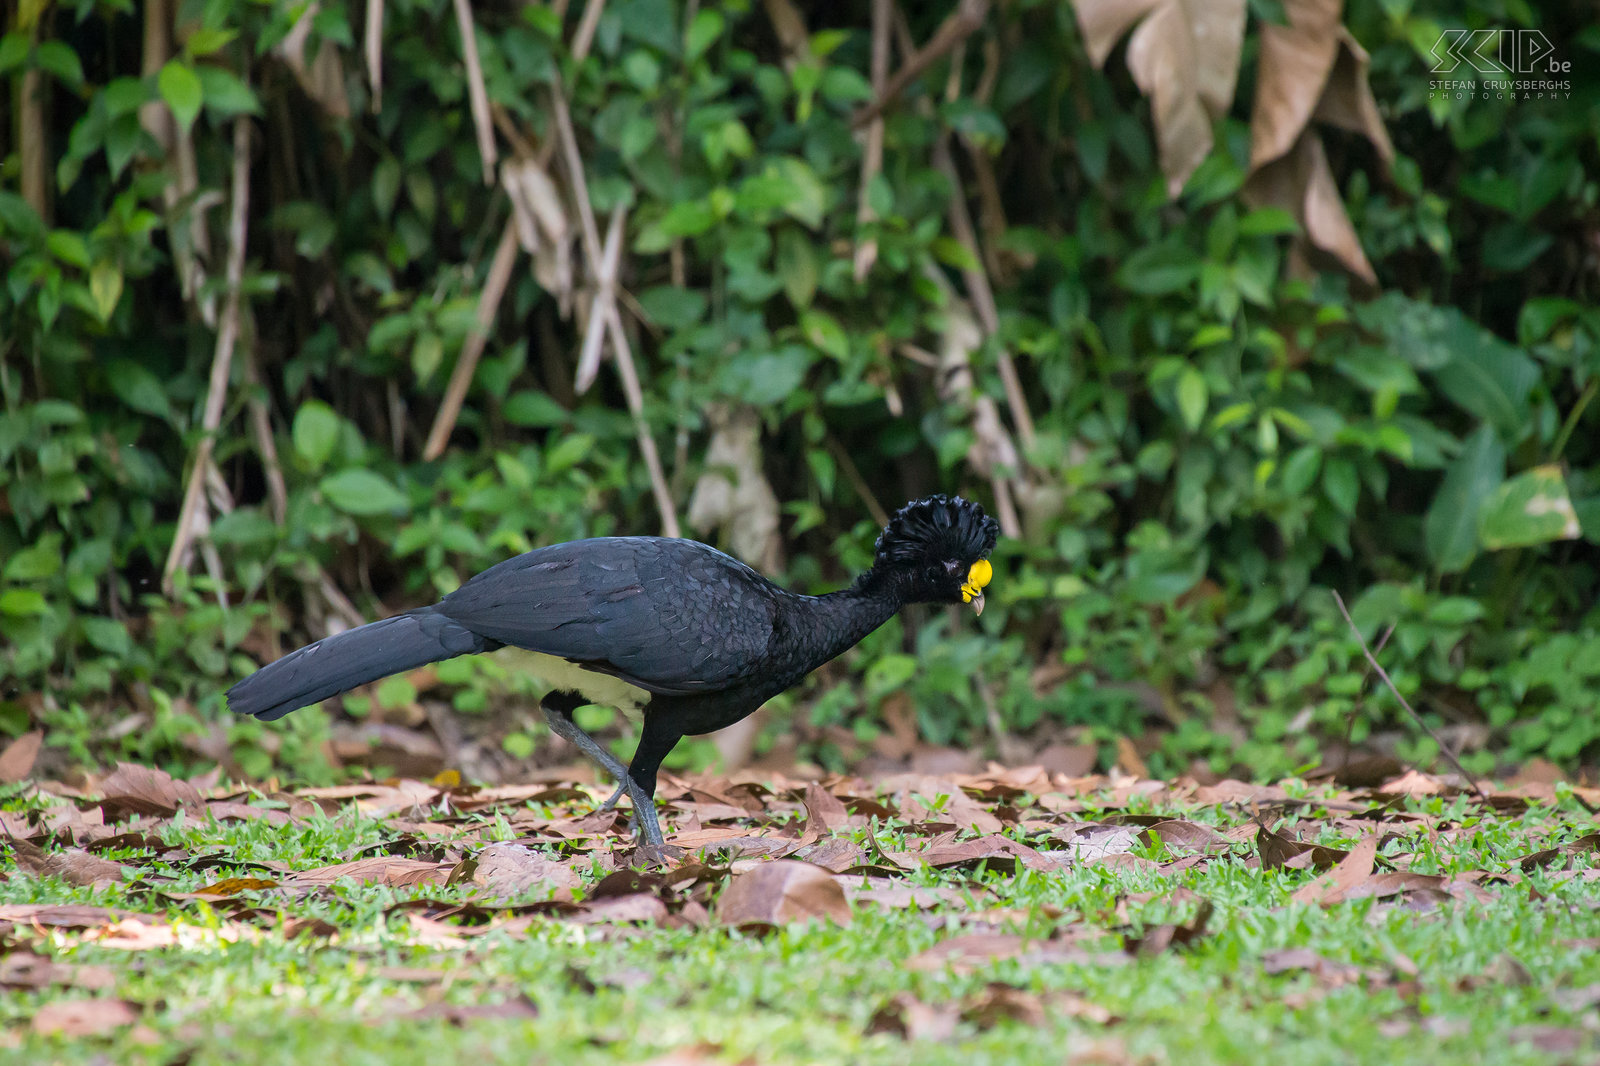 La Selva - Great curassow The great curassow (crax rubra) is a large pheasant-like bird. The male is black with a curly crest and a yellow knob on its bill. The female has brown colors and a black head.<br />
 Stefan Cruysberghs